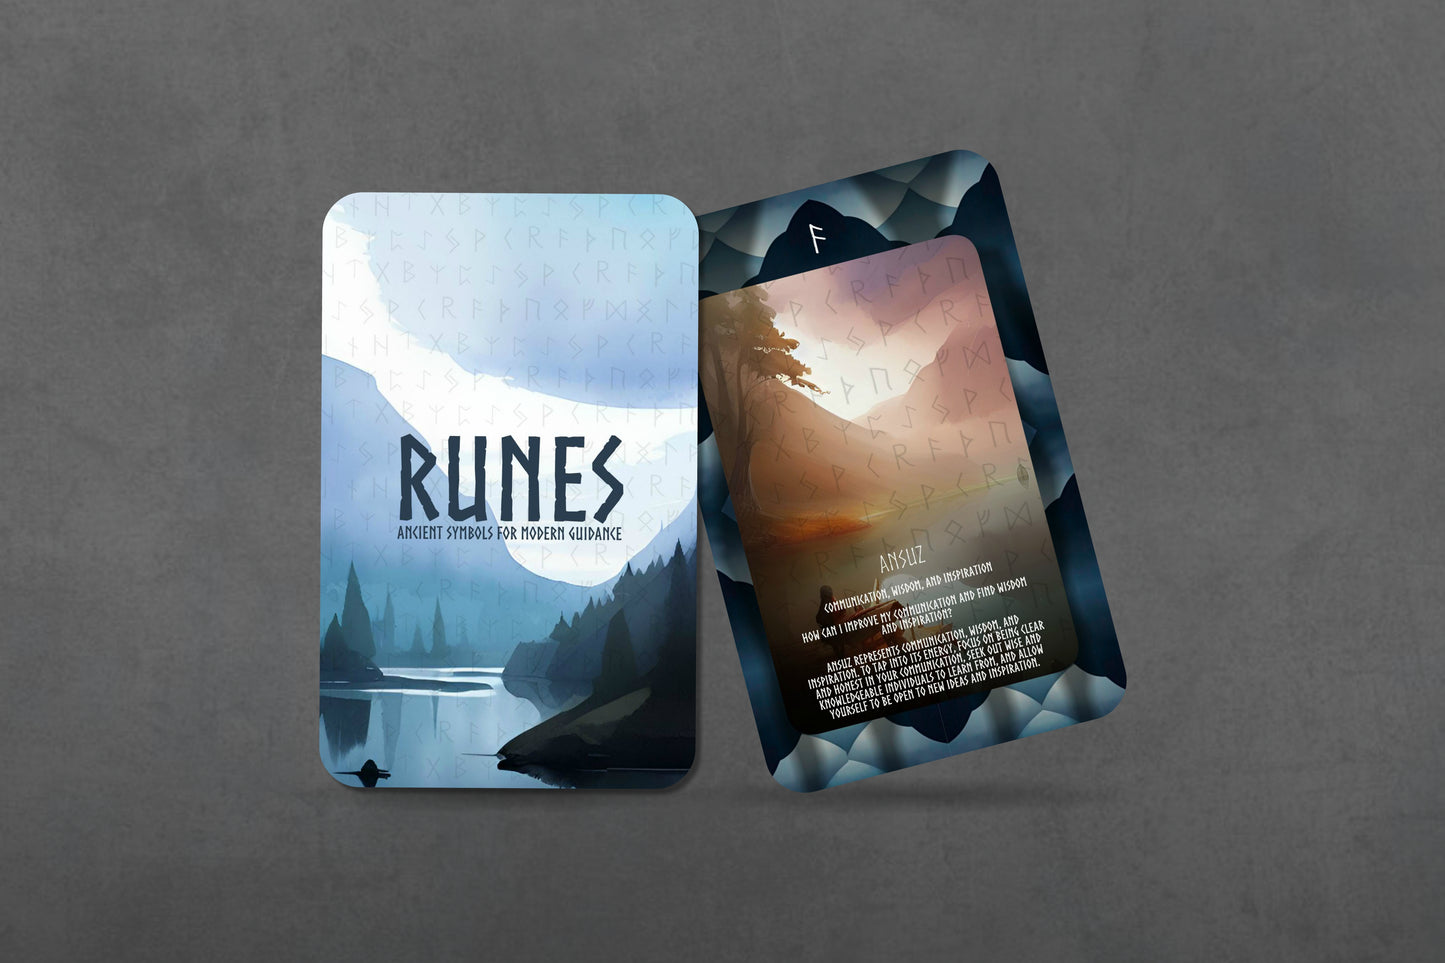 Runes - Ancient Symbols for Modern Guidance